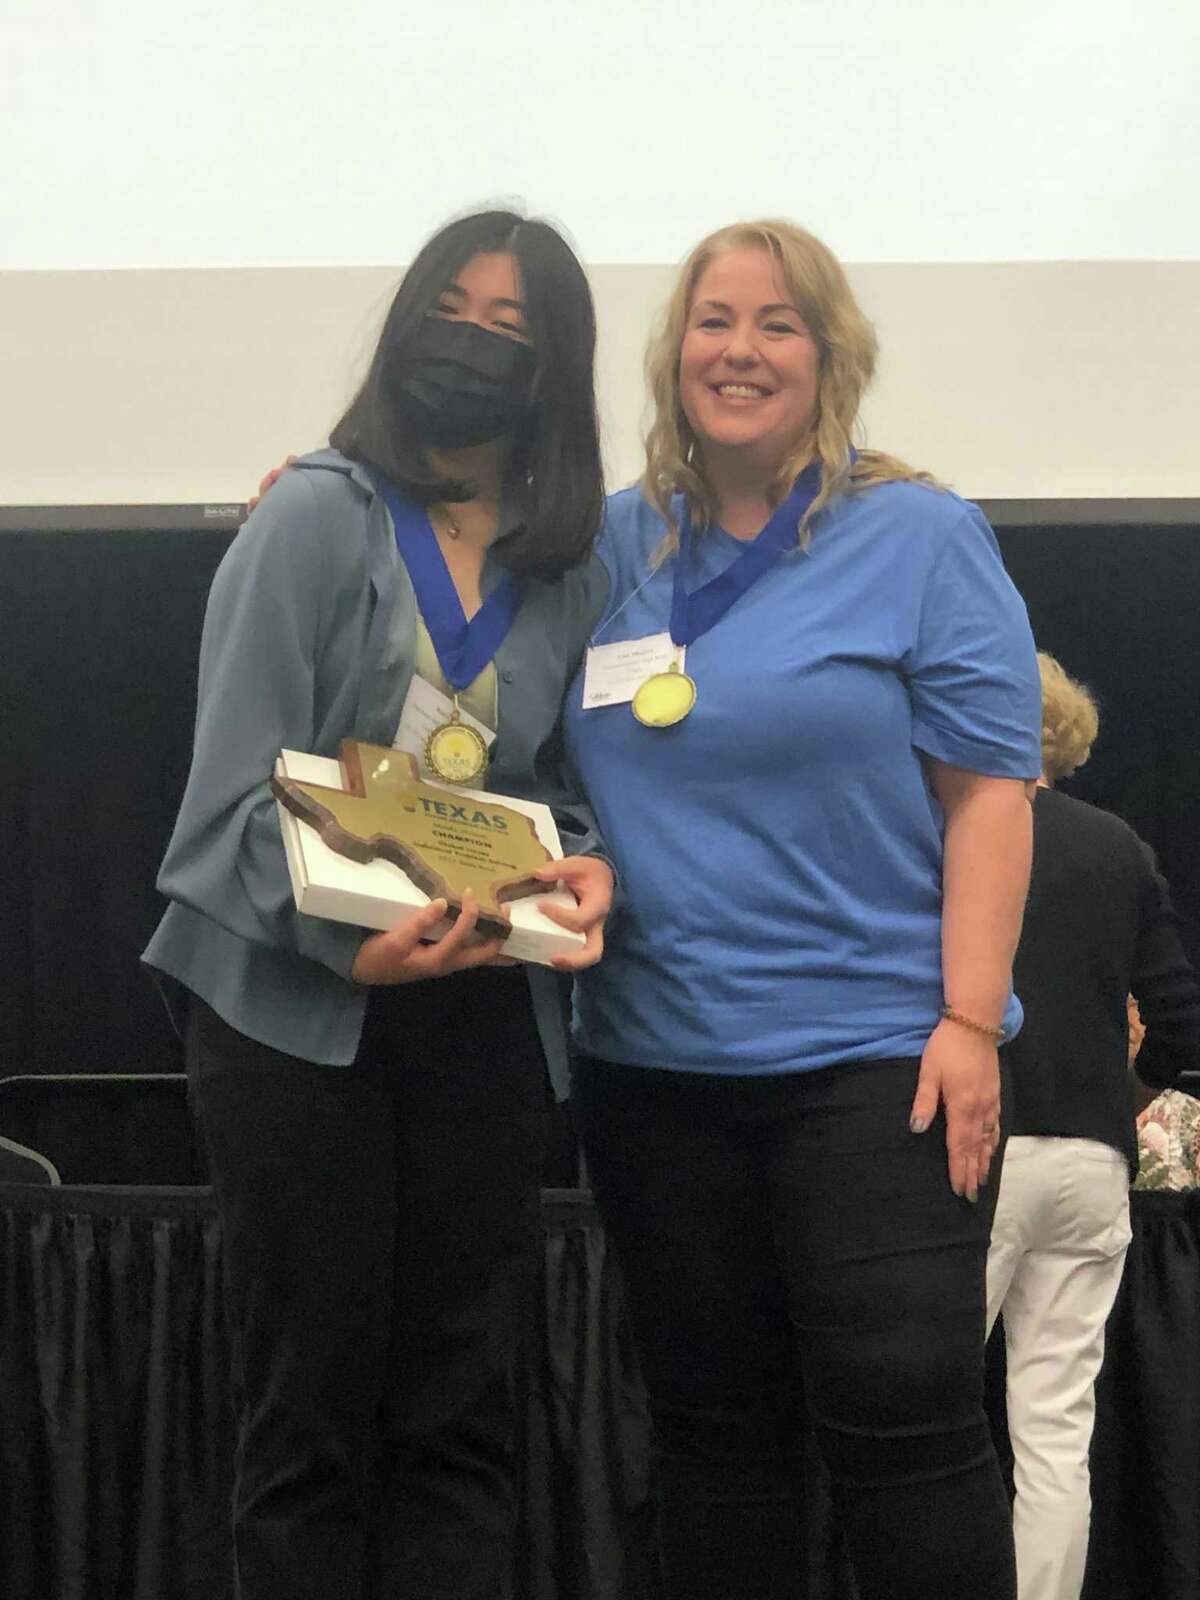 Pearland Junior High West student Kara Li, left, joins Future Problem Solving coach Lisa Shapiro after winning the individual Global Issue Problem Solving competition at State Bowl in April.